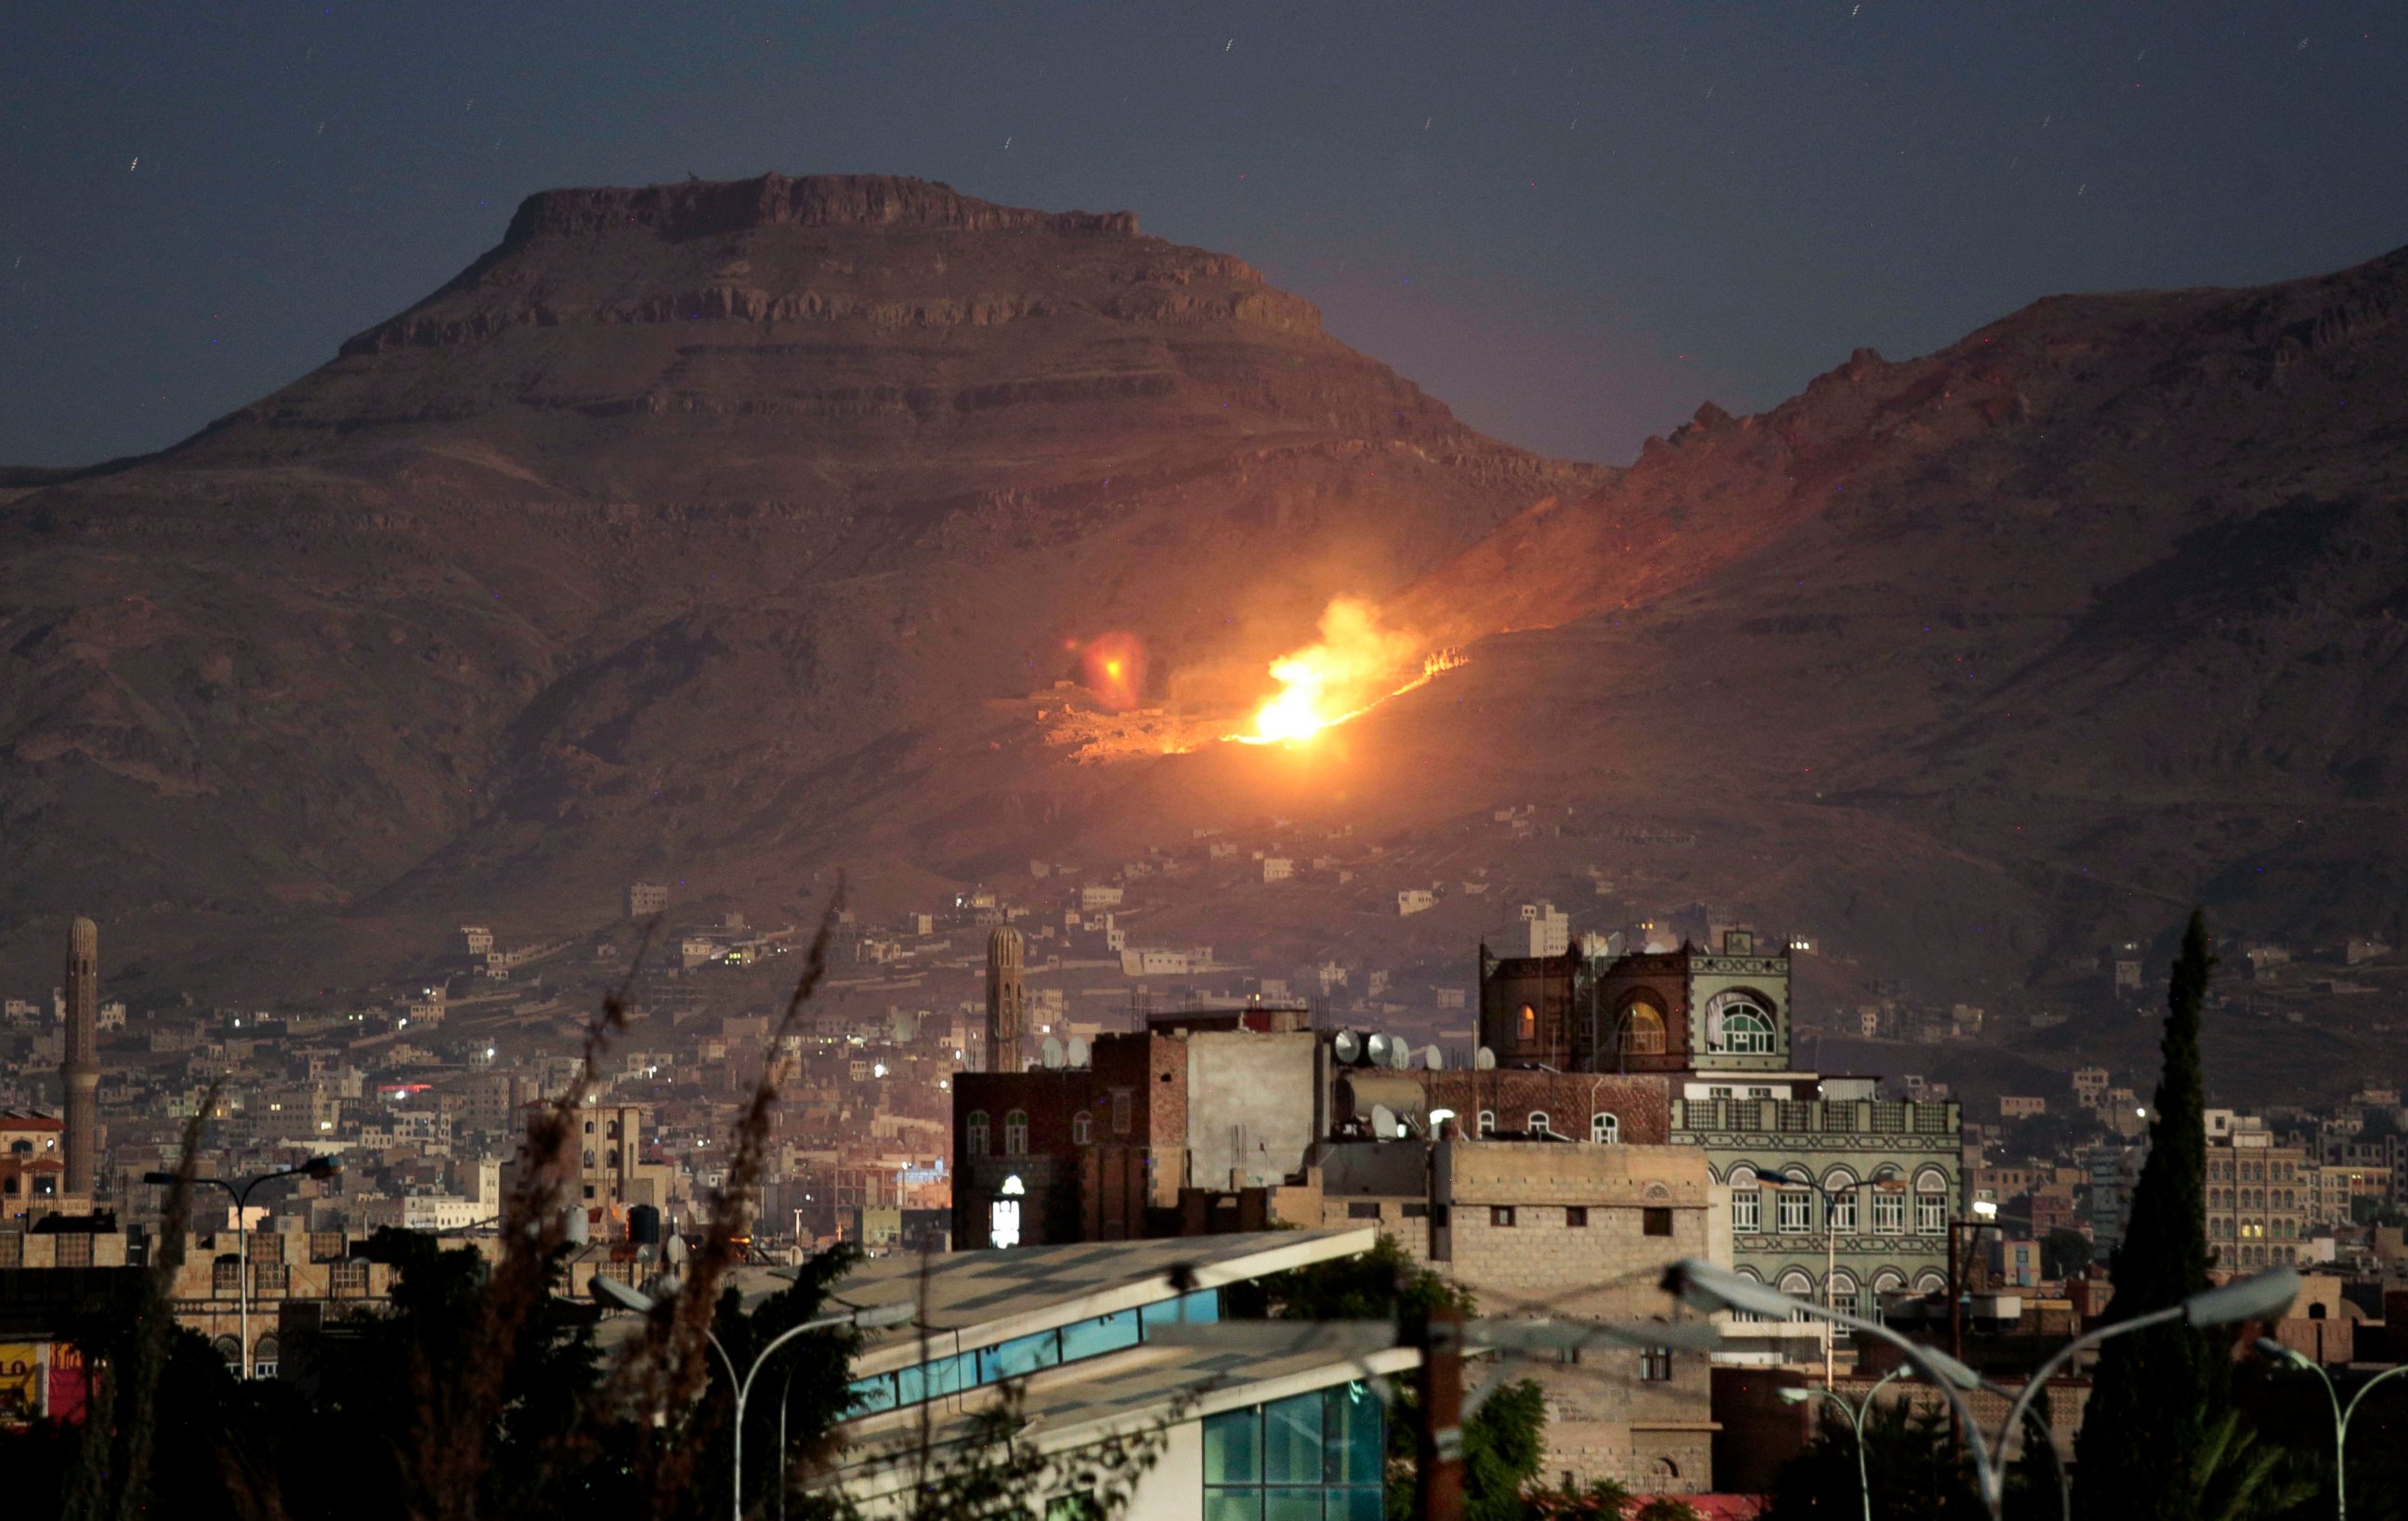 PHOTO: In this Oct. 14, 2016 file photo, fire and smoke rise after a Saudi-led airstrike hit a site believed to be one of the largest weapons depots on the outskirts of Yemen's capital, Sanaa.